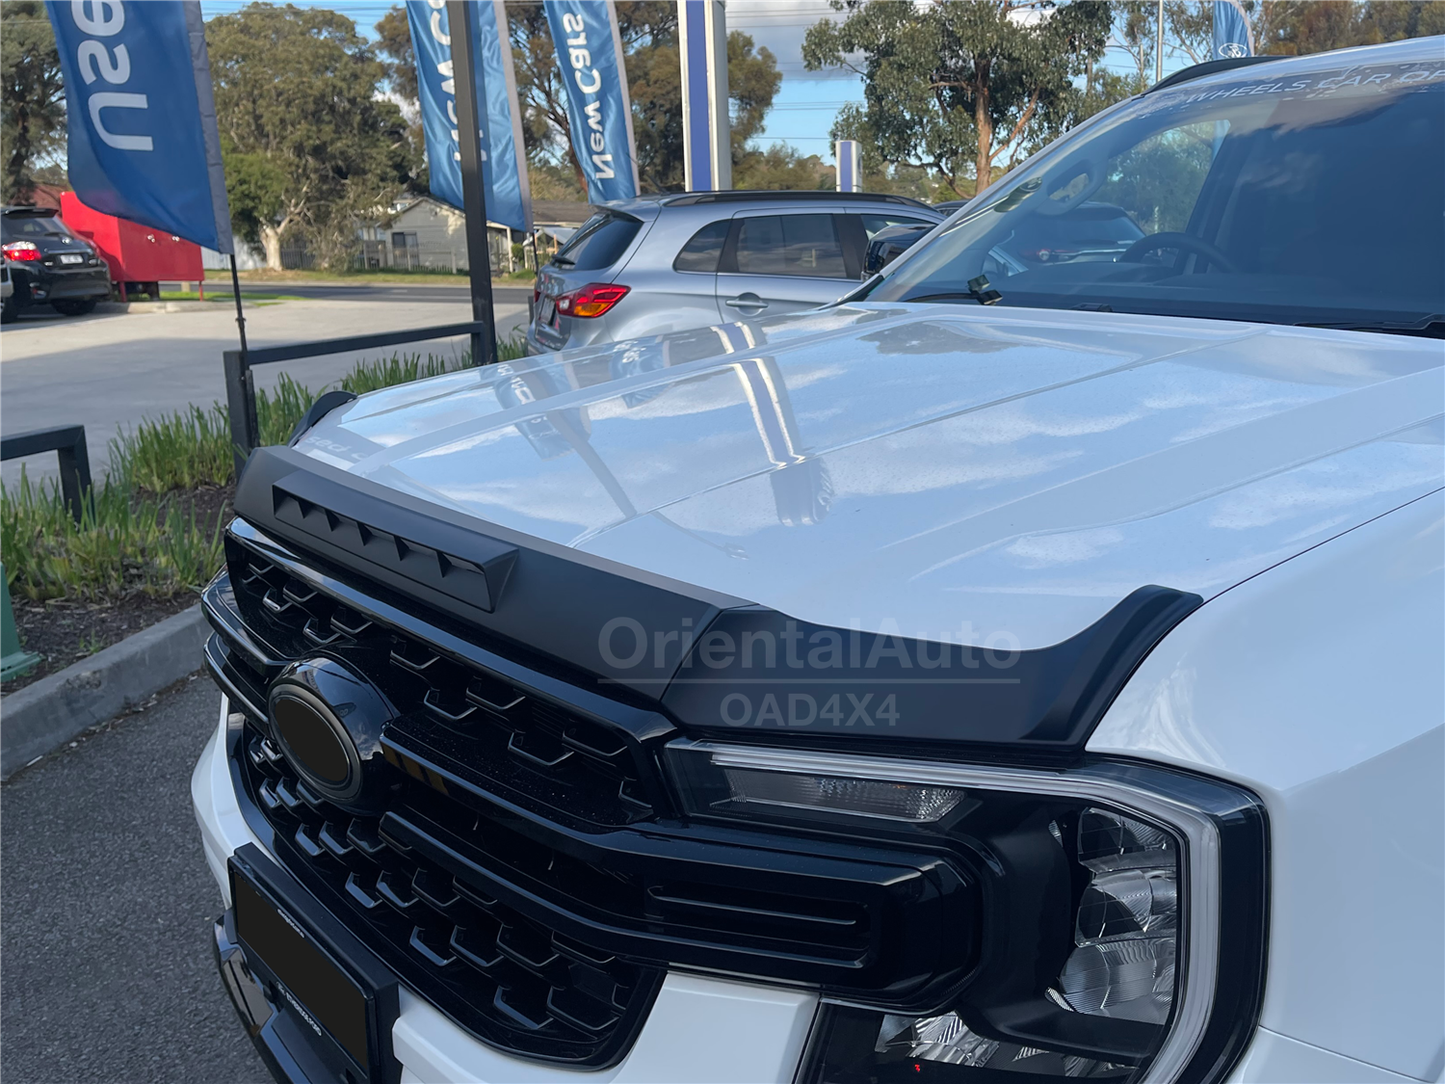 Injection Modeling Exclusive 3pcs Bonnet Protector for Ford Everest Next-Gen 2022-Onwards Hood Protector Guard